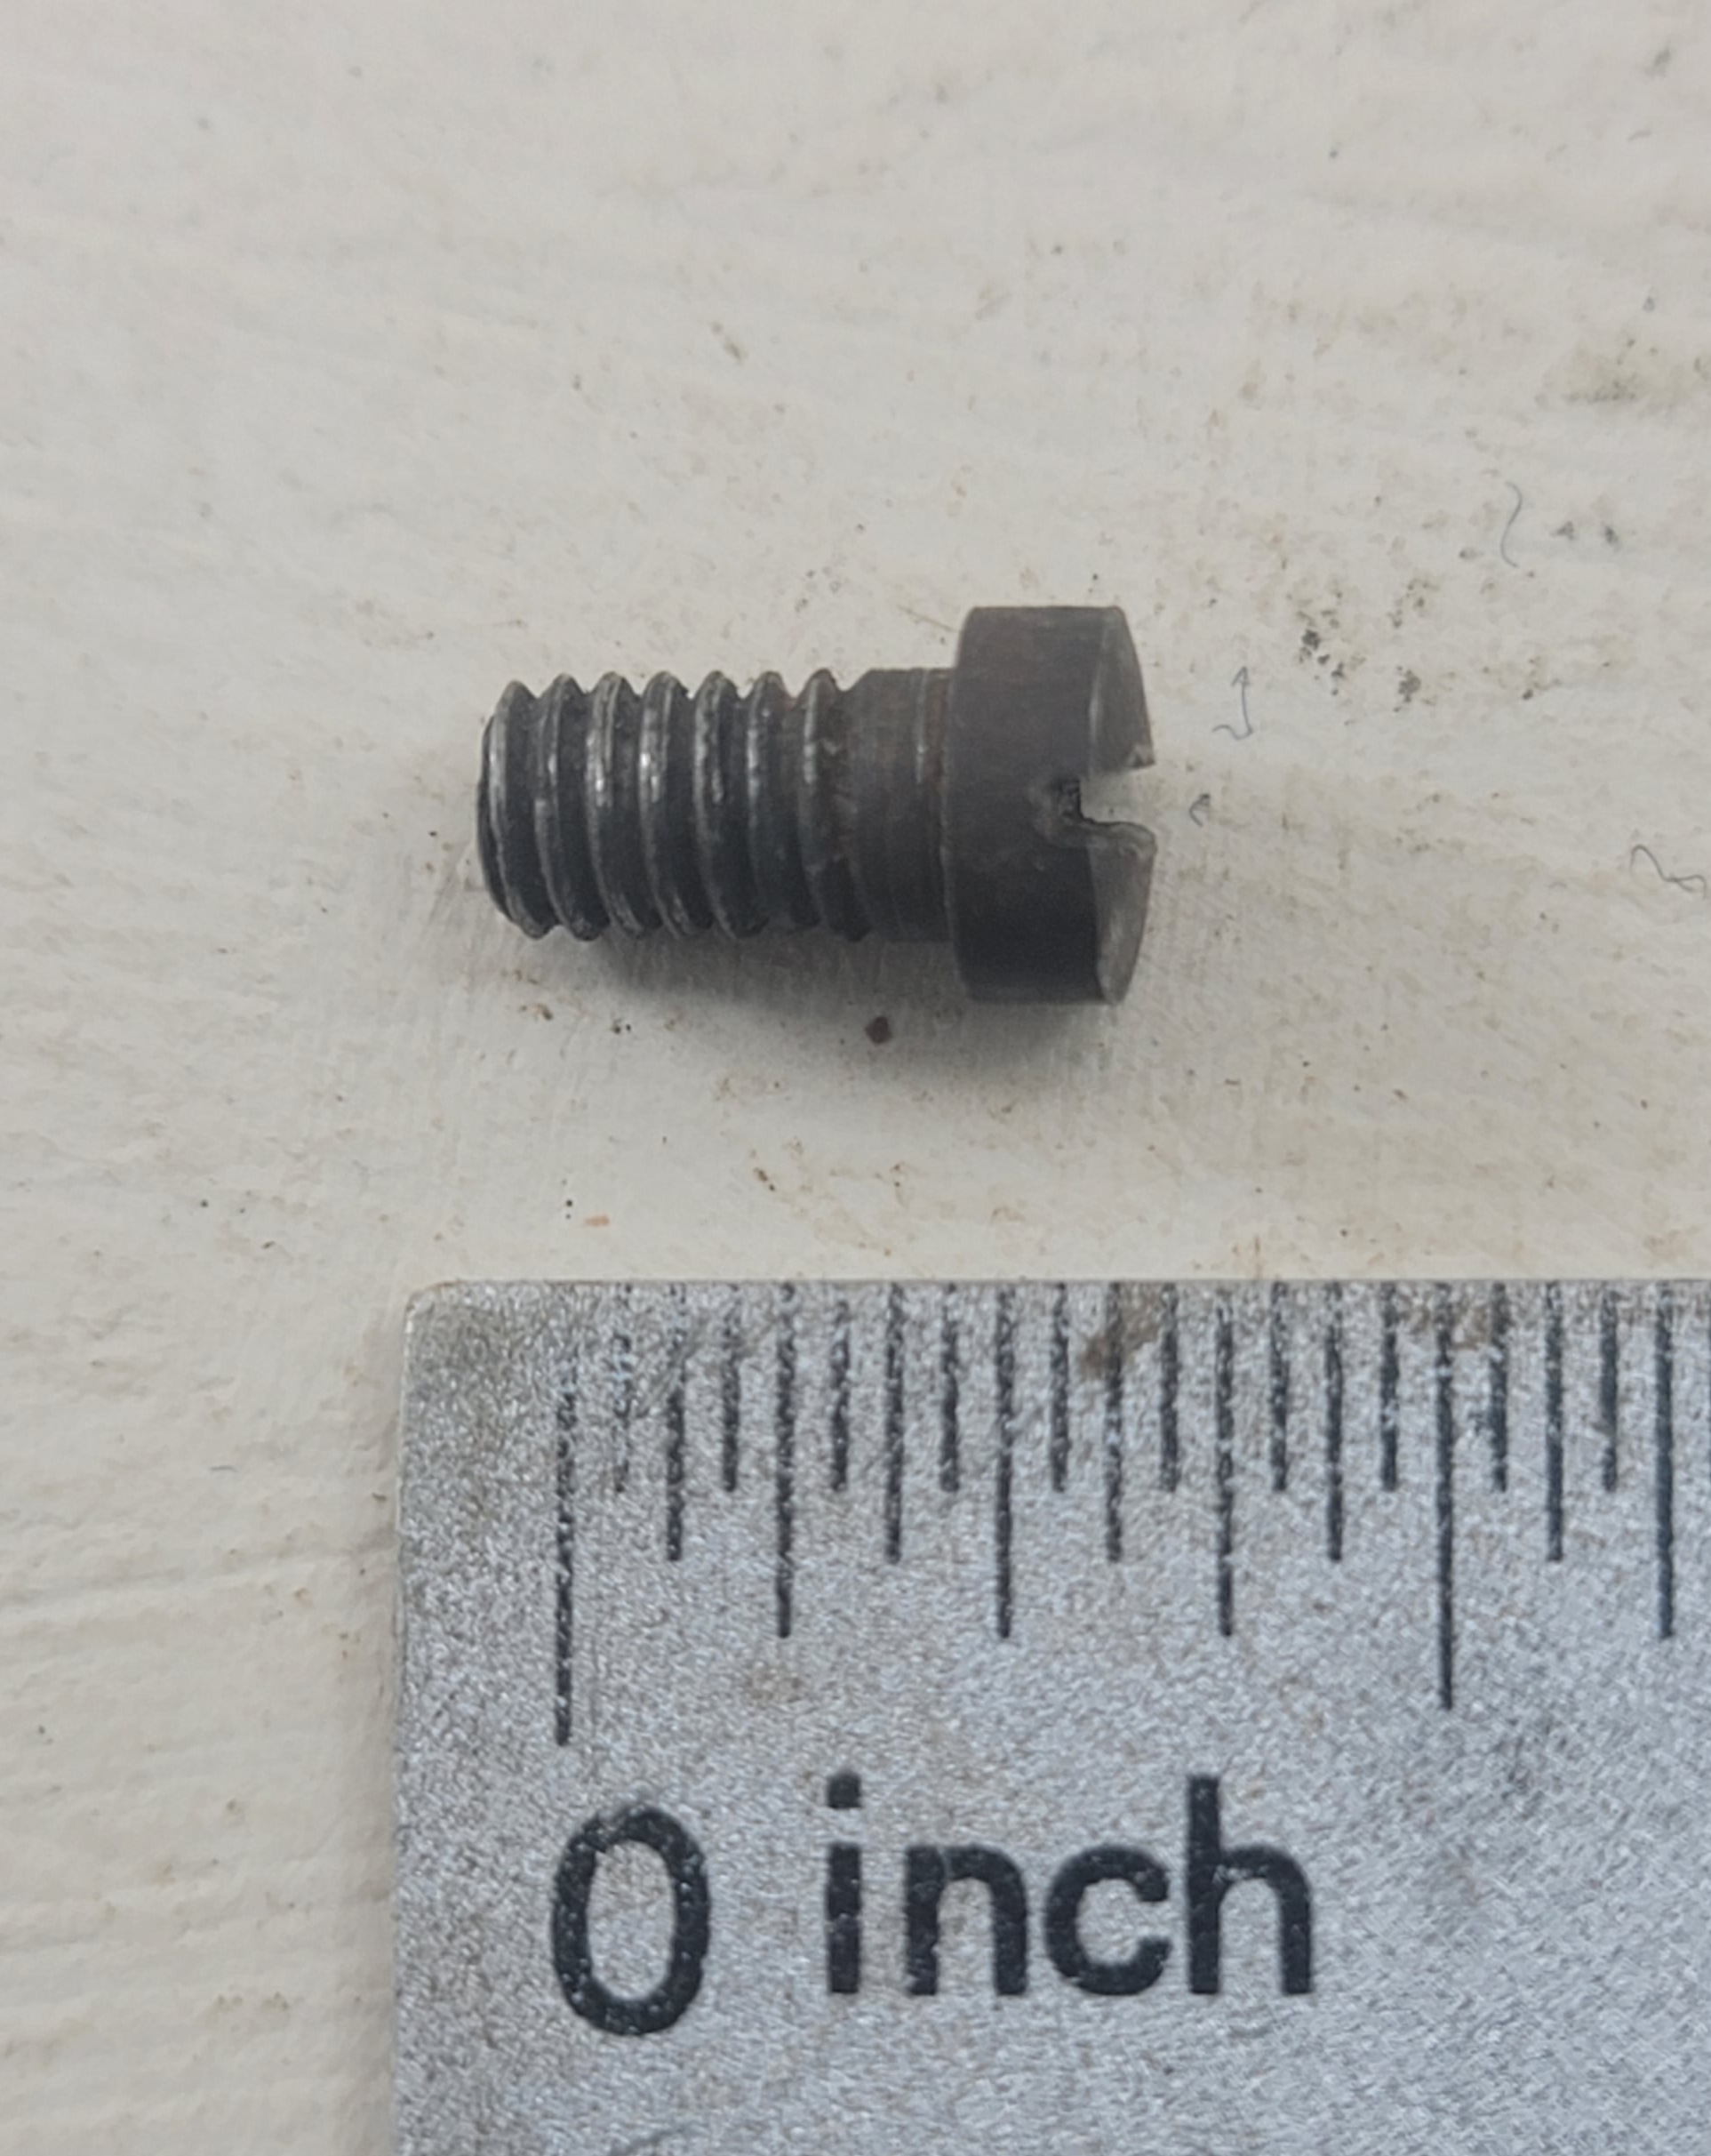 Carrier spring screw (also called the Carrier stop screw) Winchester 1886